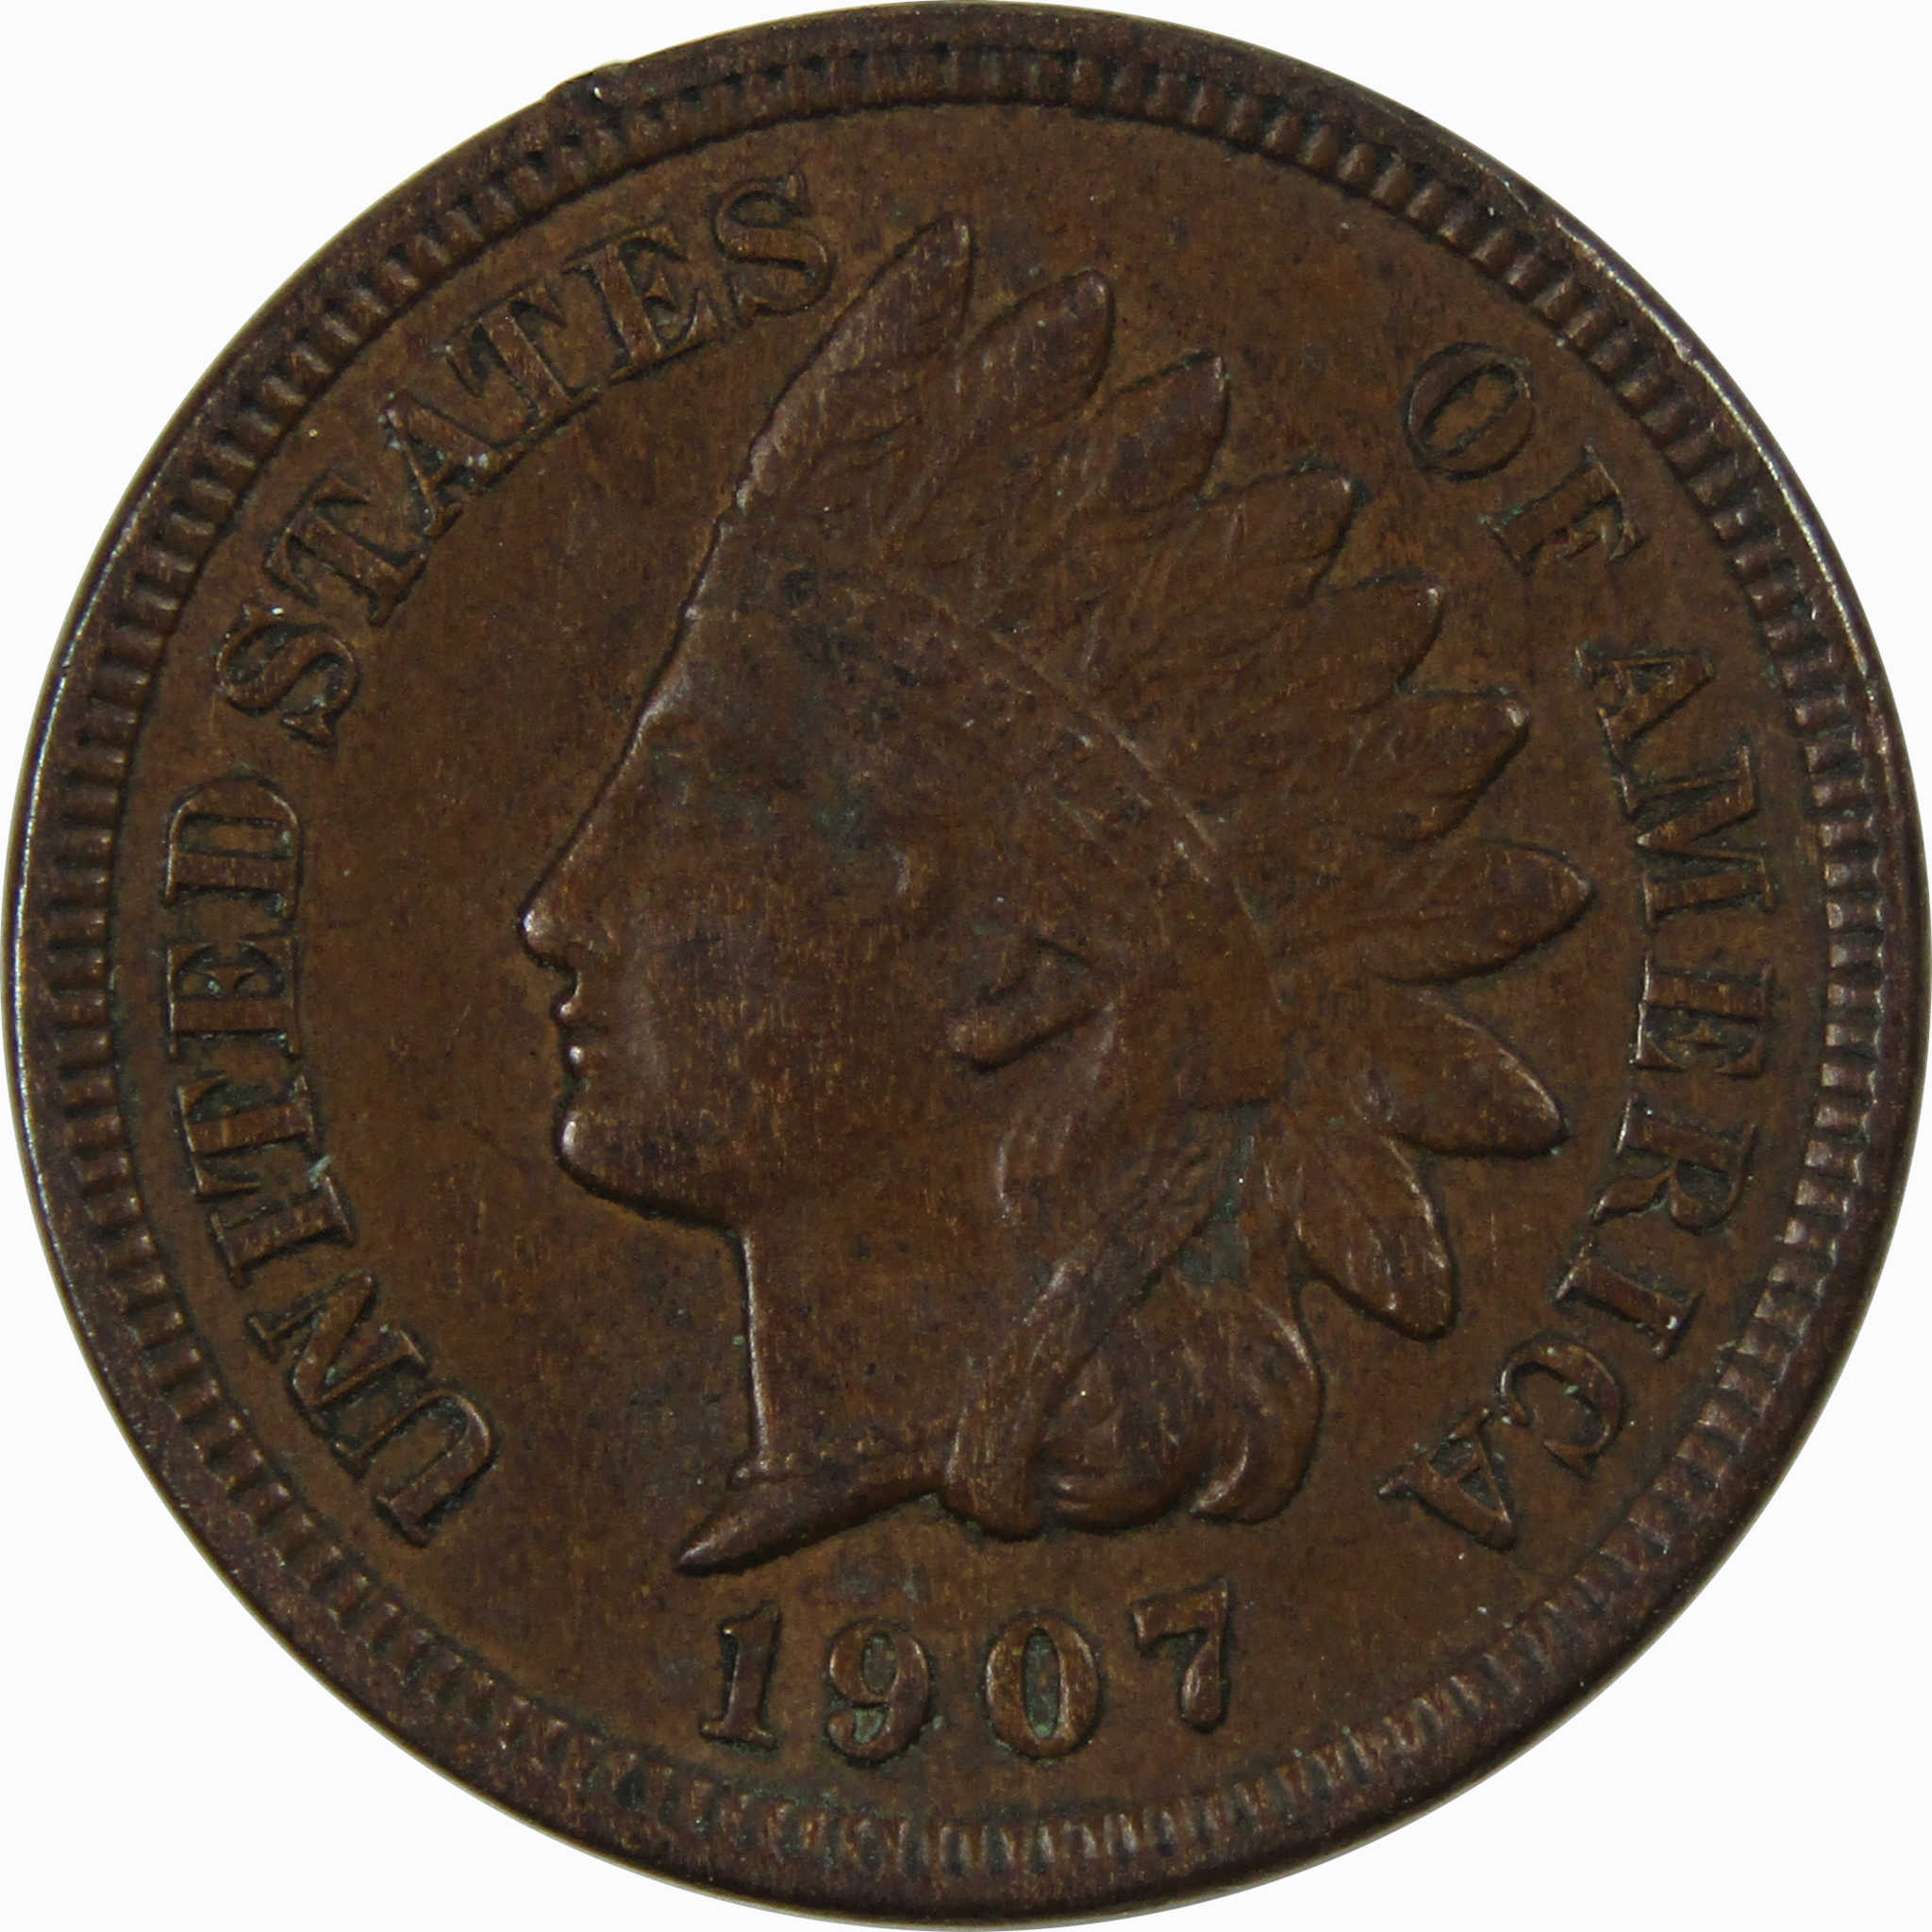 1907 Indian Head Cent Borderline Uncirculated Penny US Coin SKU:I4317